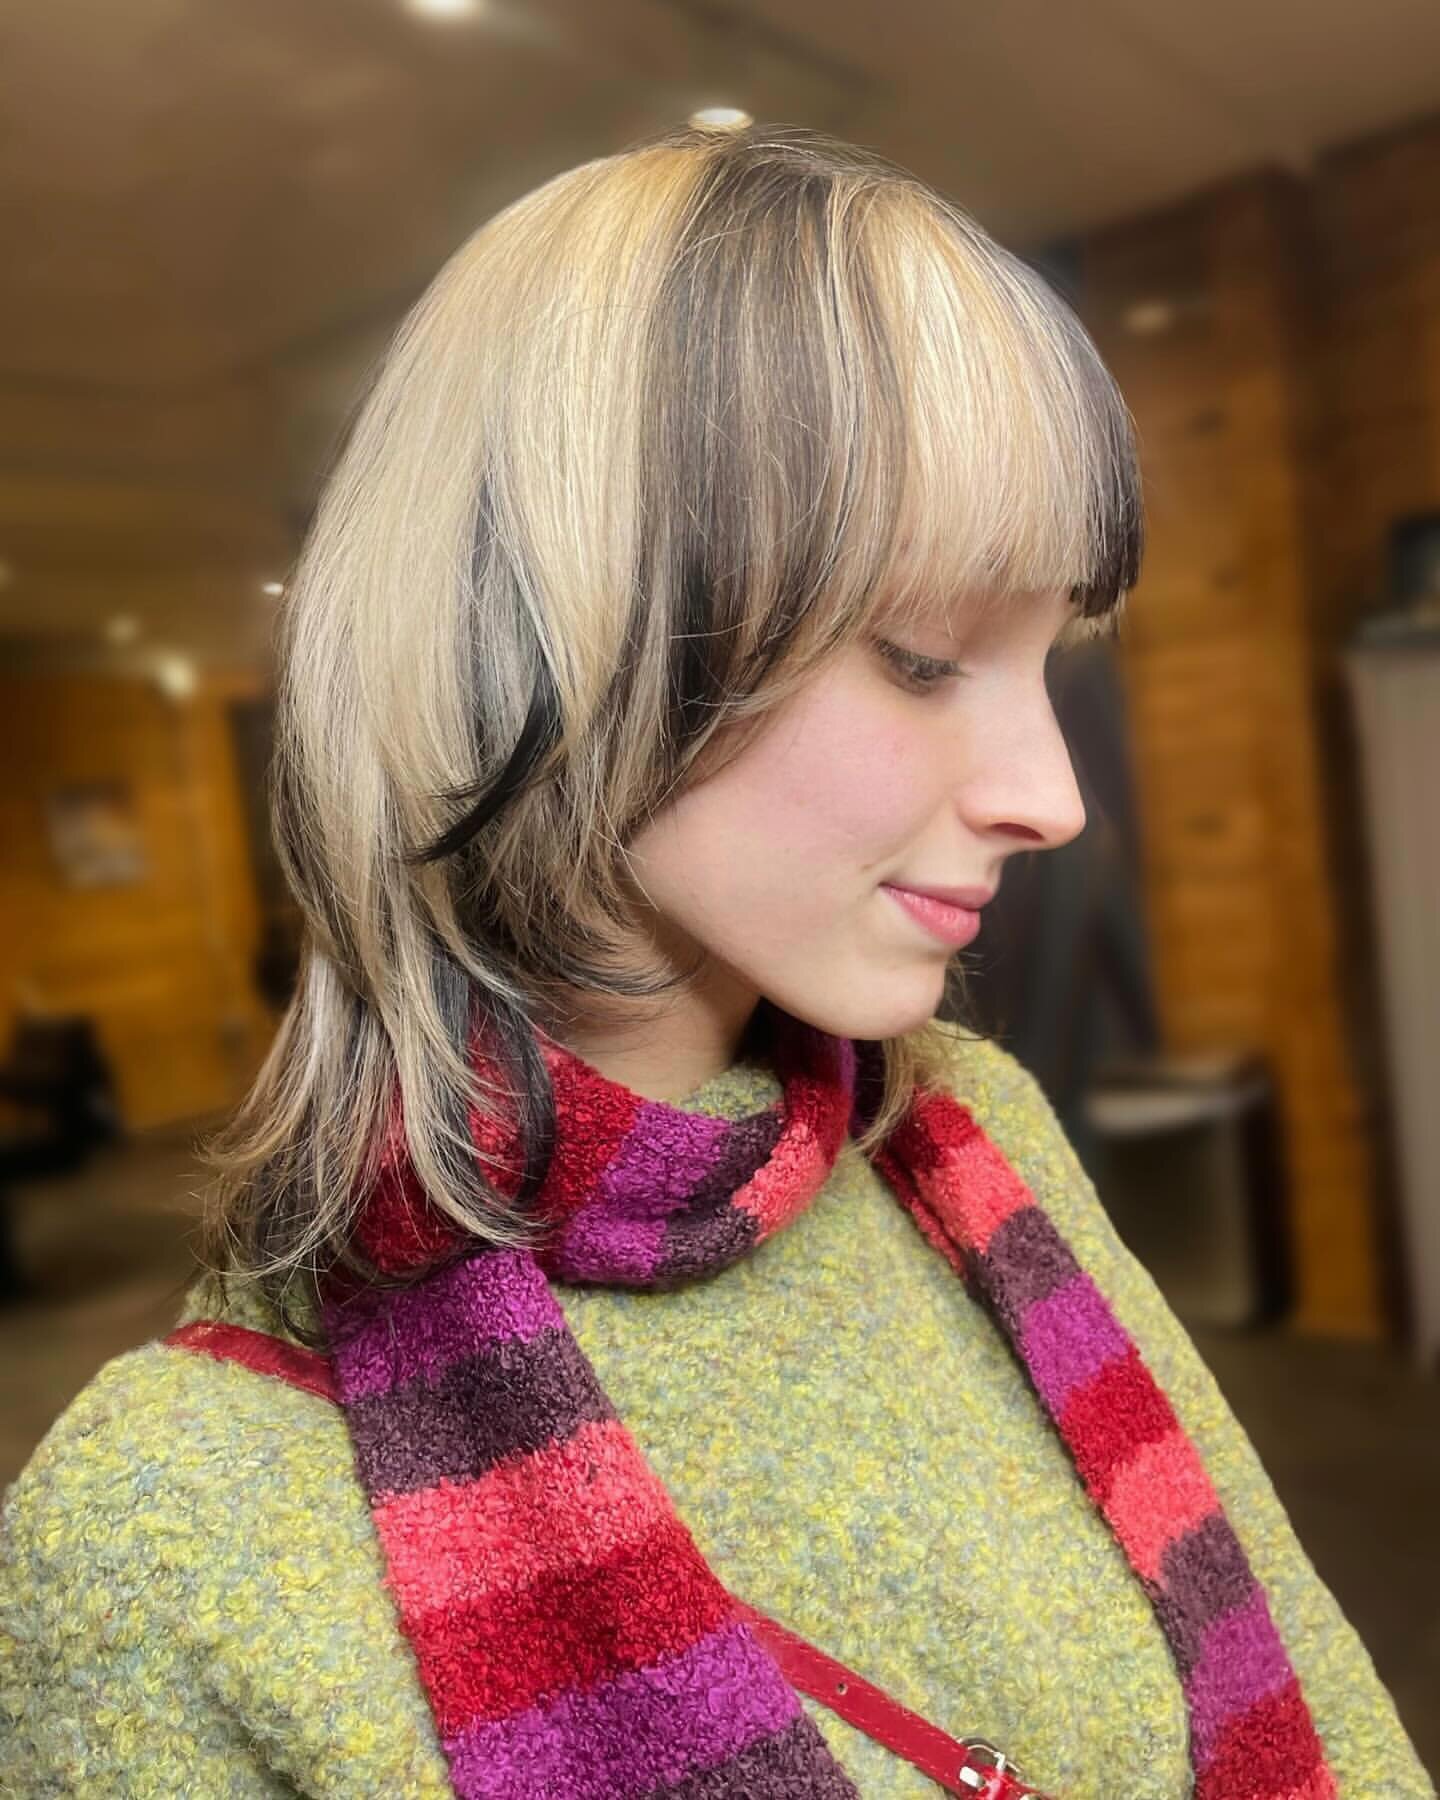 Chunky highlight fantasy 🤩🖤🤍🖤

This was SUCH a fun project by our apprentice @emjoyhair !!! We color-blocked the bangs and alternated thick highlights and lowlights around the whole head! it is so special to help clients reach their epic hair goa